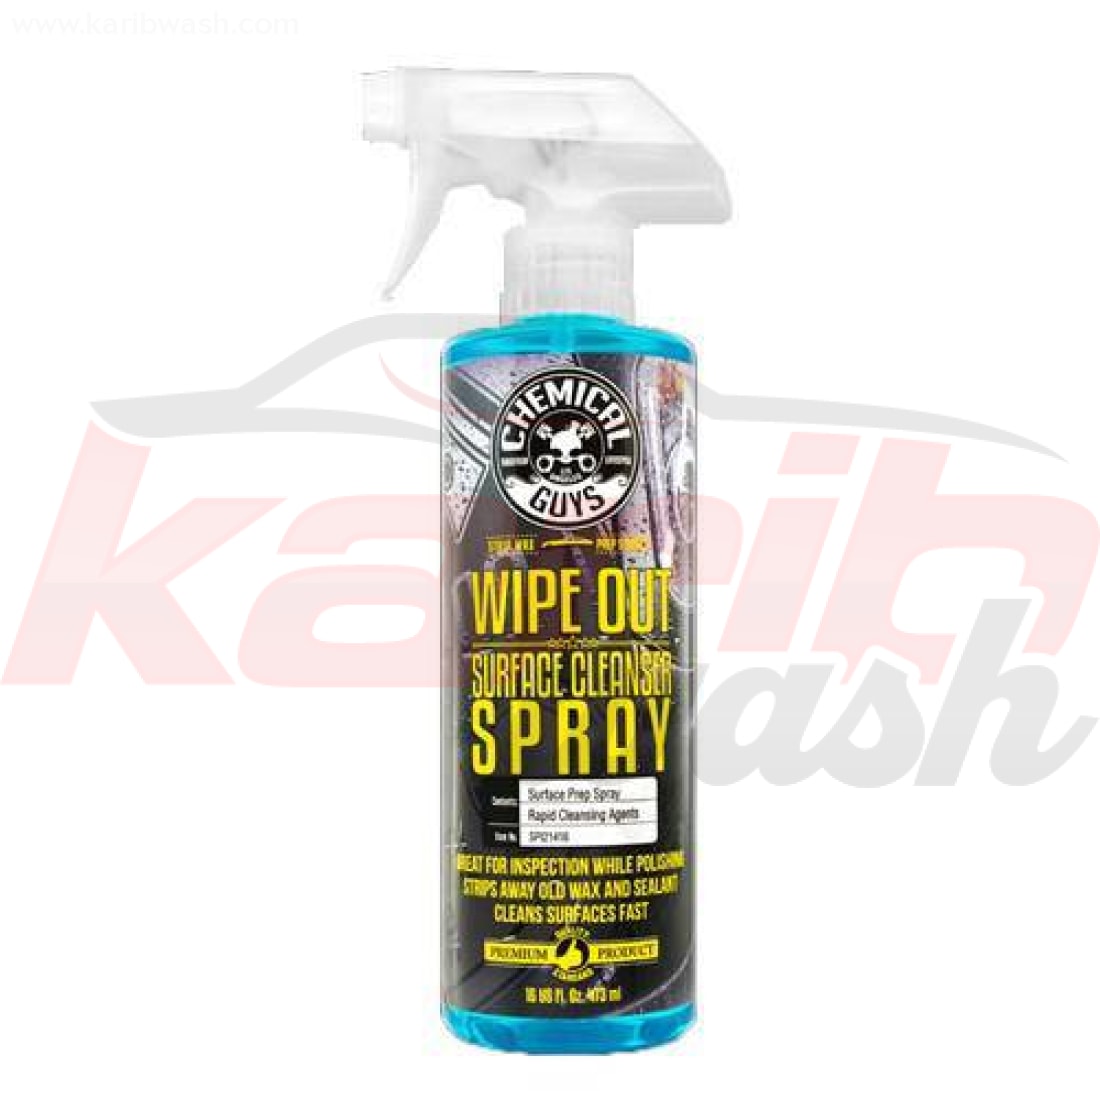 Wipe Out Surface Cleanser Spray (16 oz) - CHEMICAL GUYS - KARIBWASH